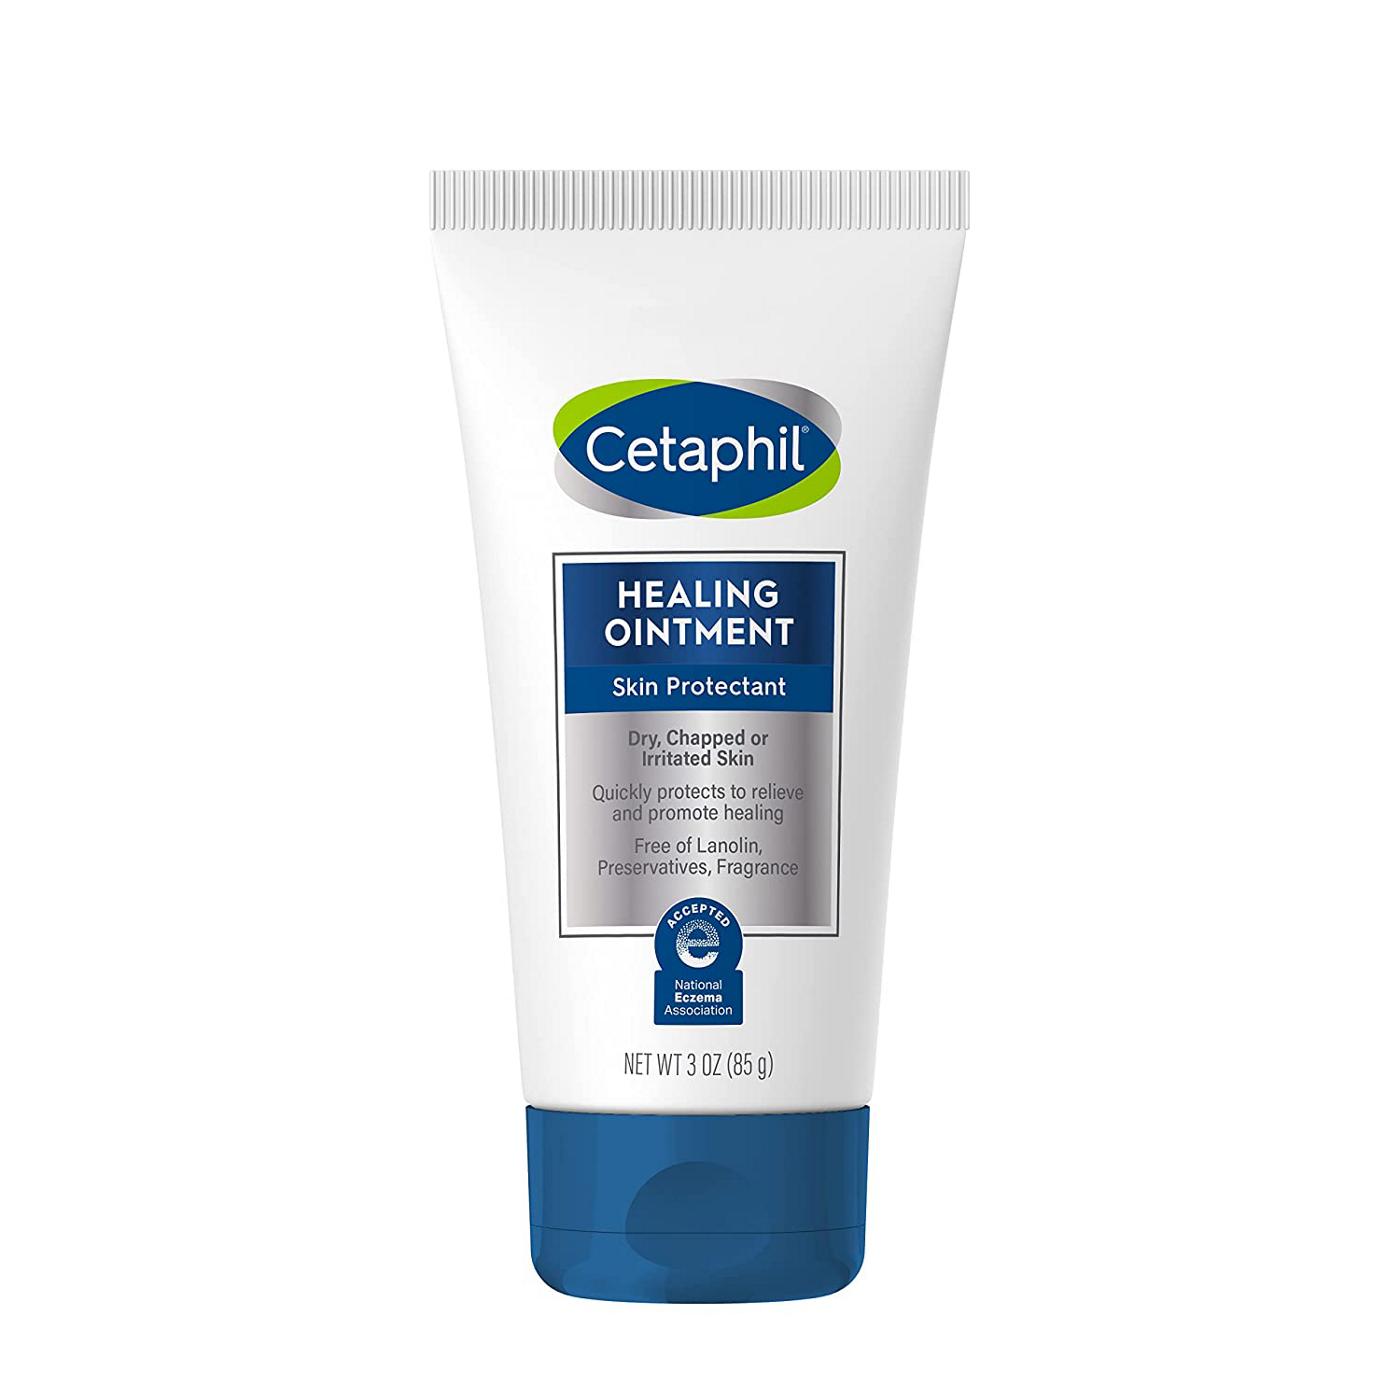 Cetaphil Healing Ointment; image 1 of 8